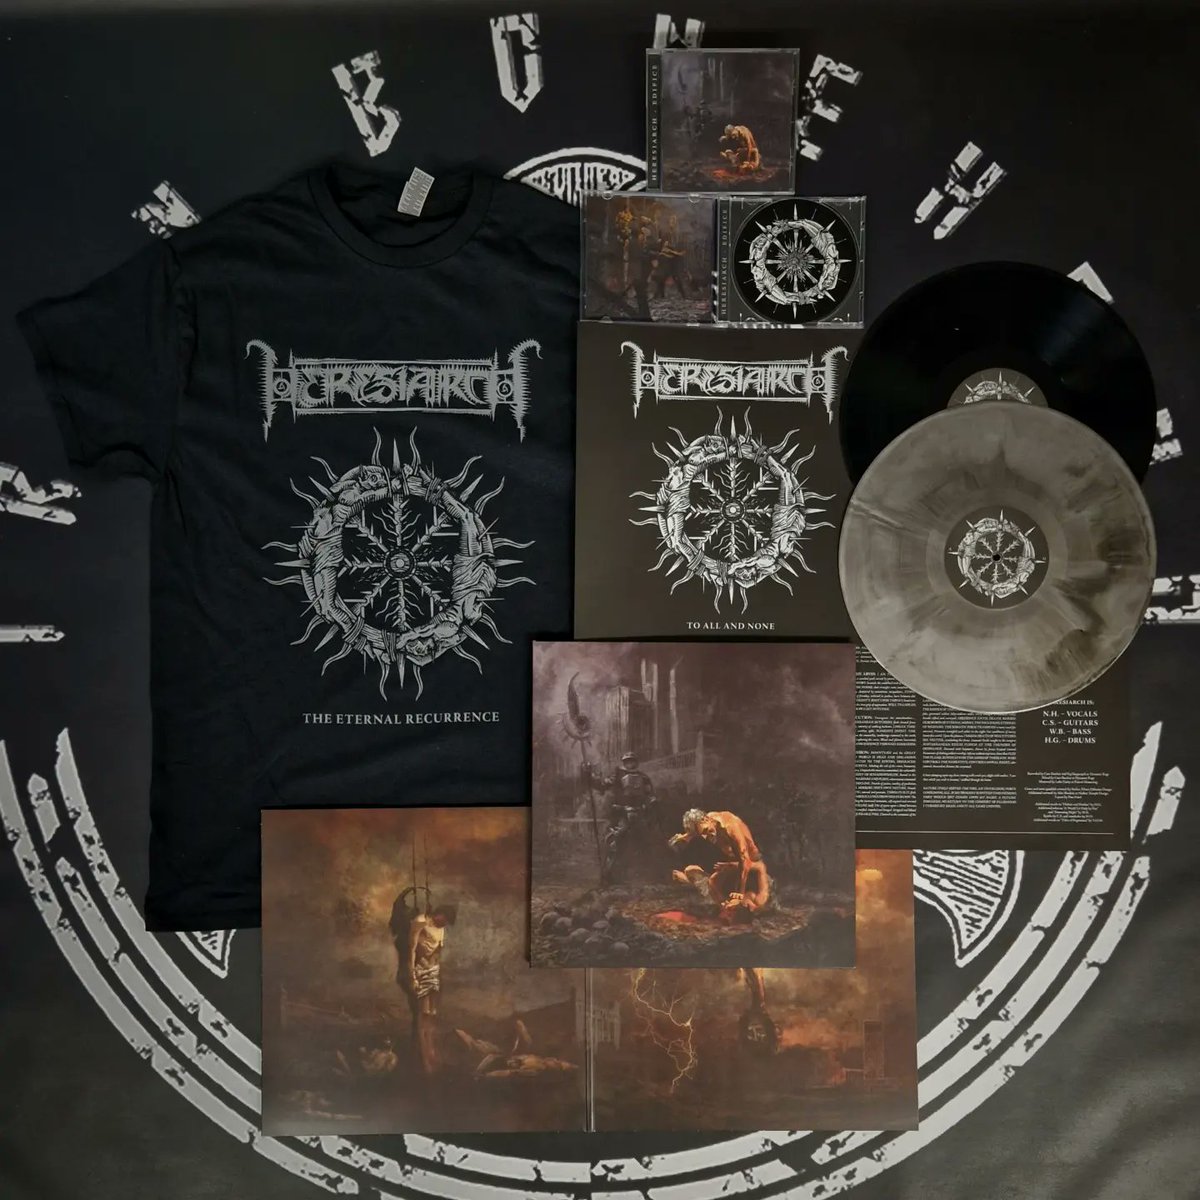 OUT NOW! HERESIARCH (New Zealand) 'Edifice' LP/CD/T-Shirt